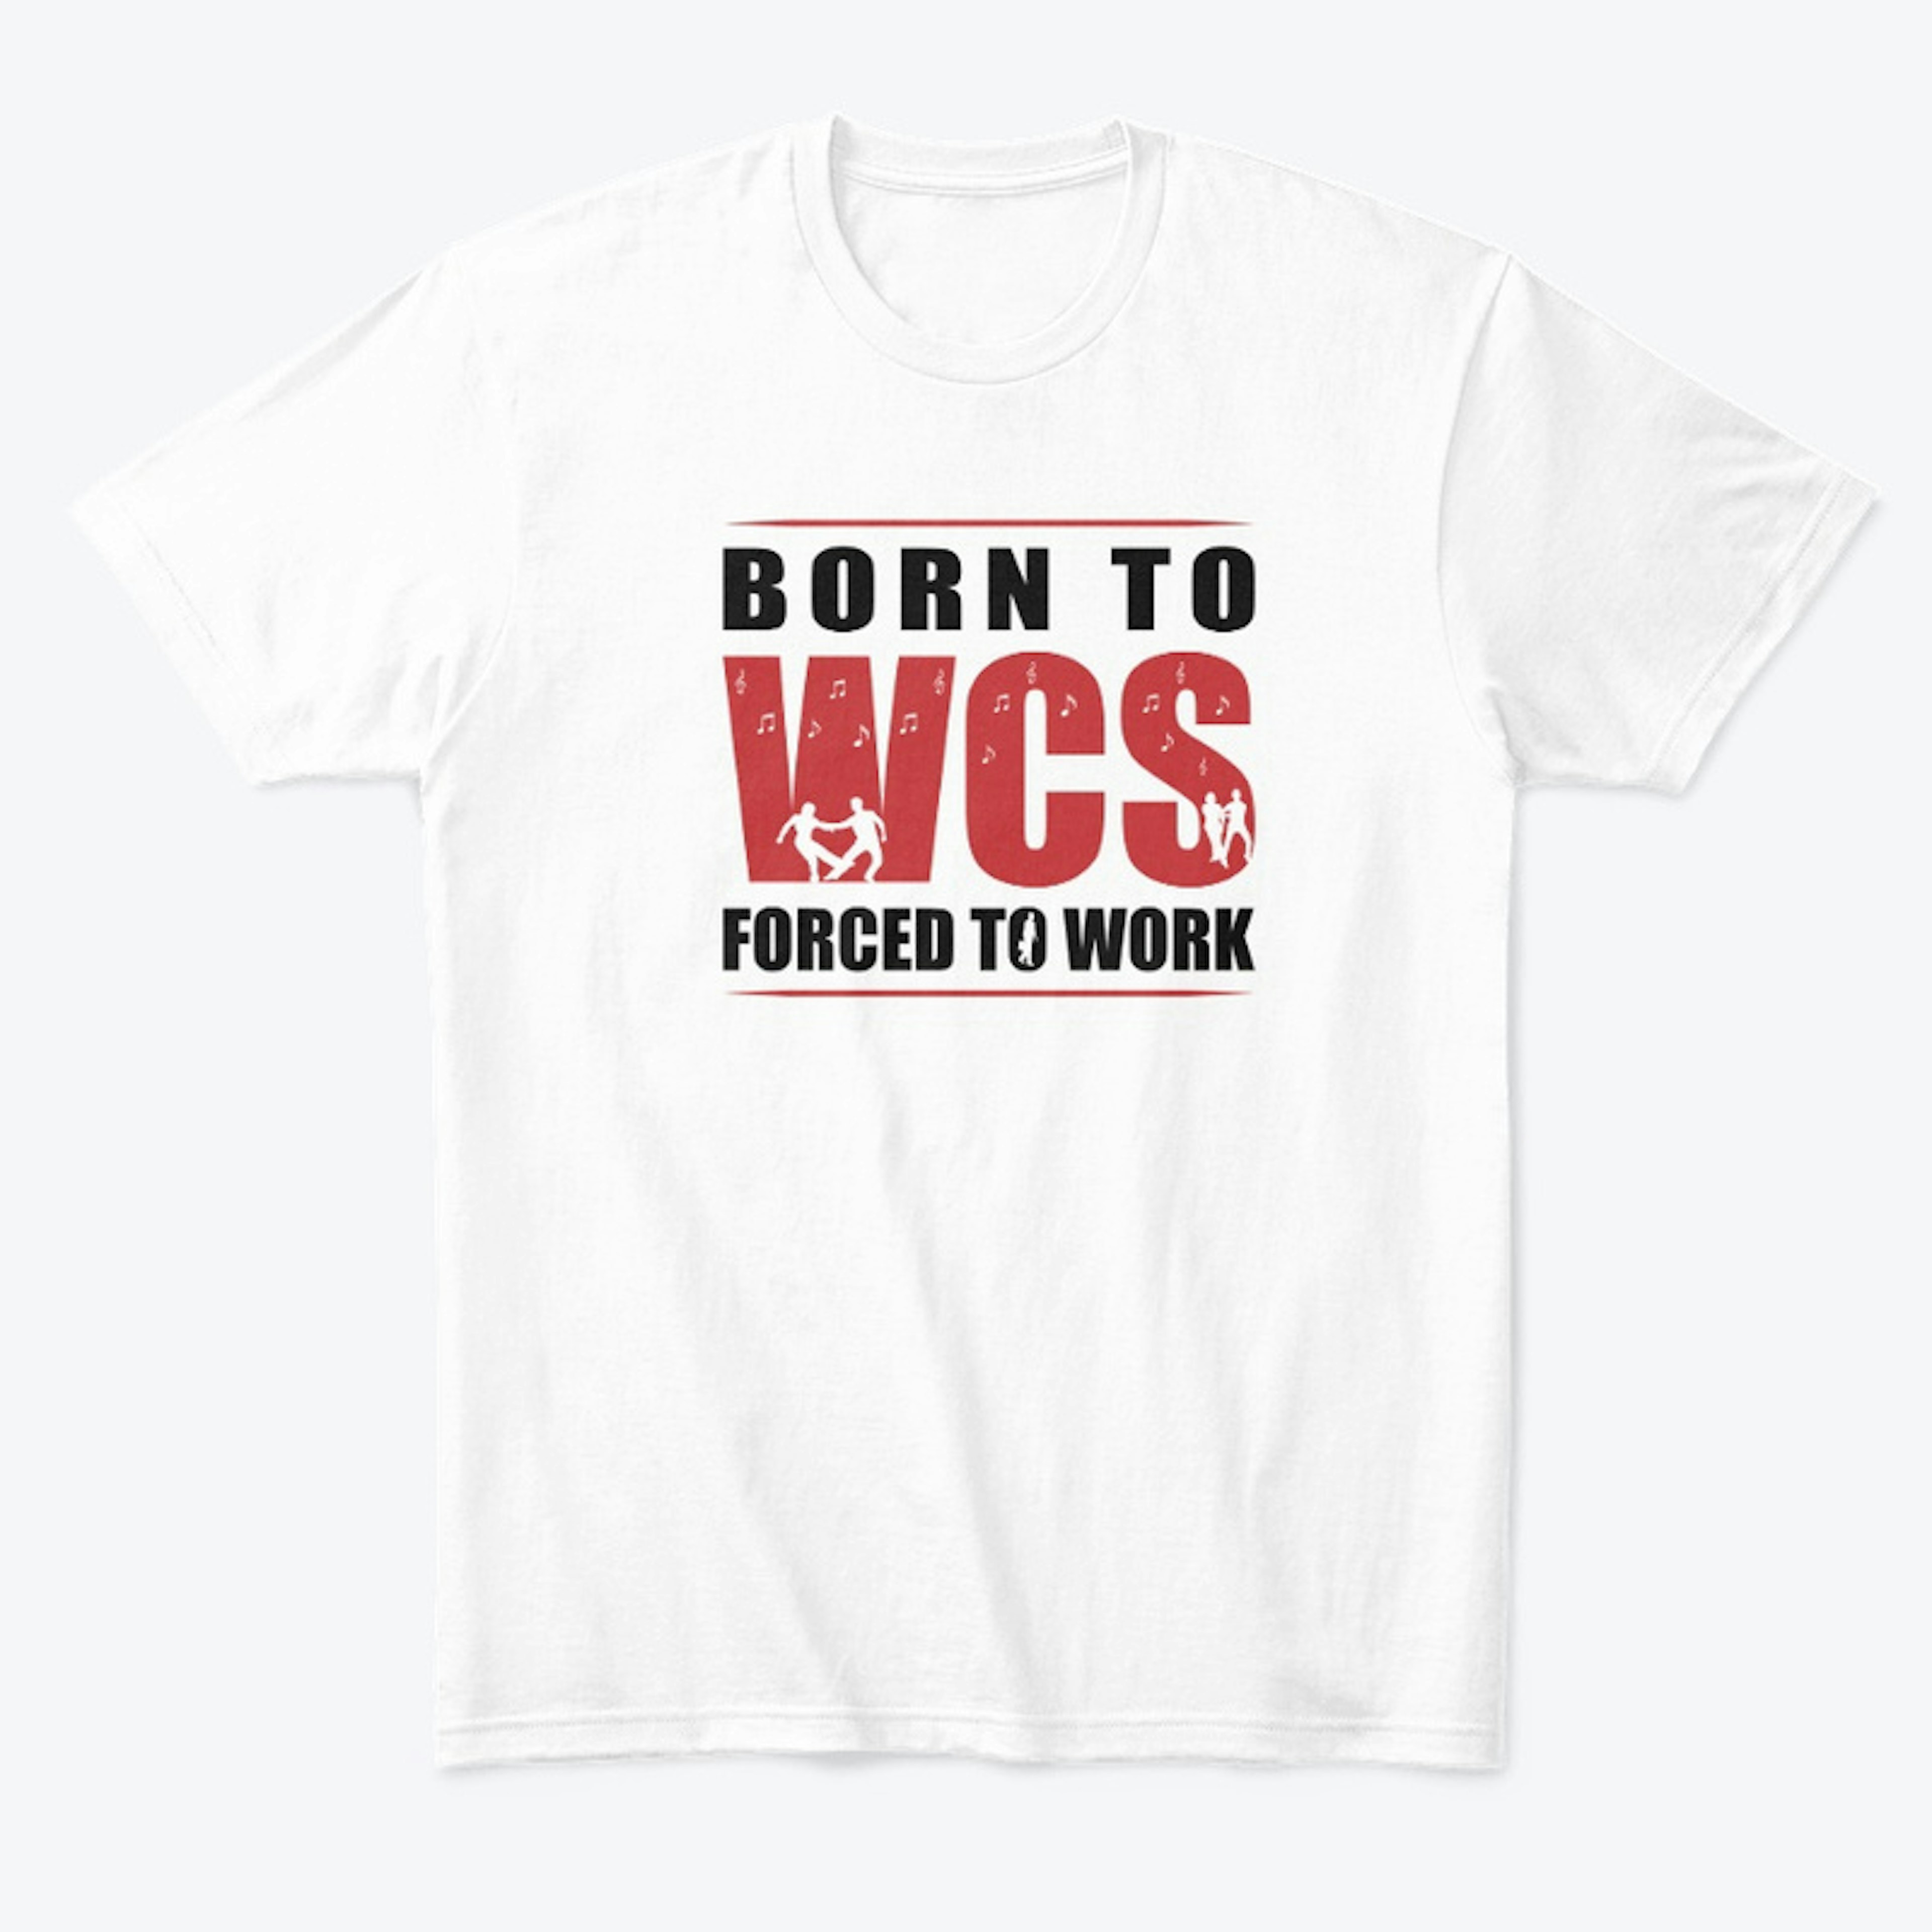 Born to WCS